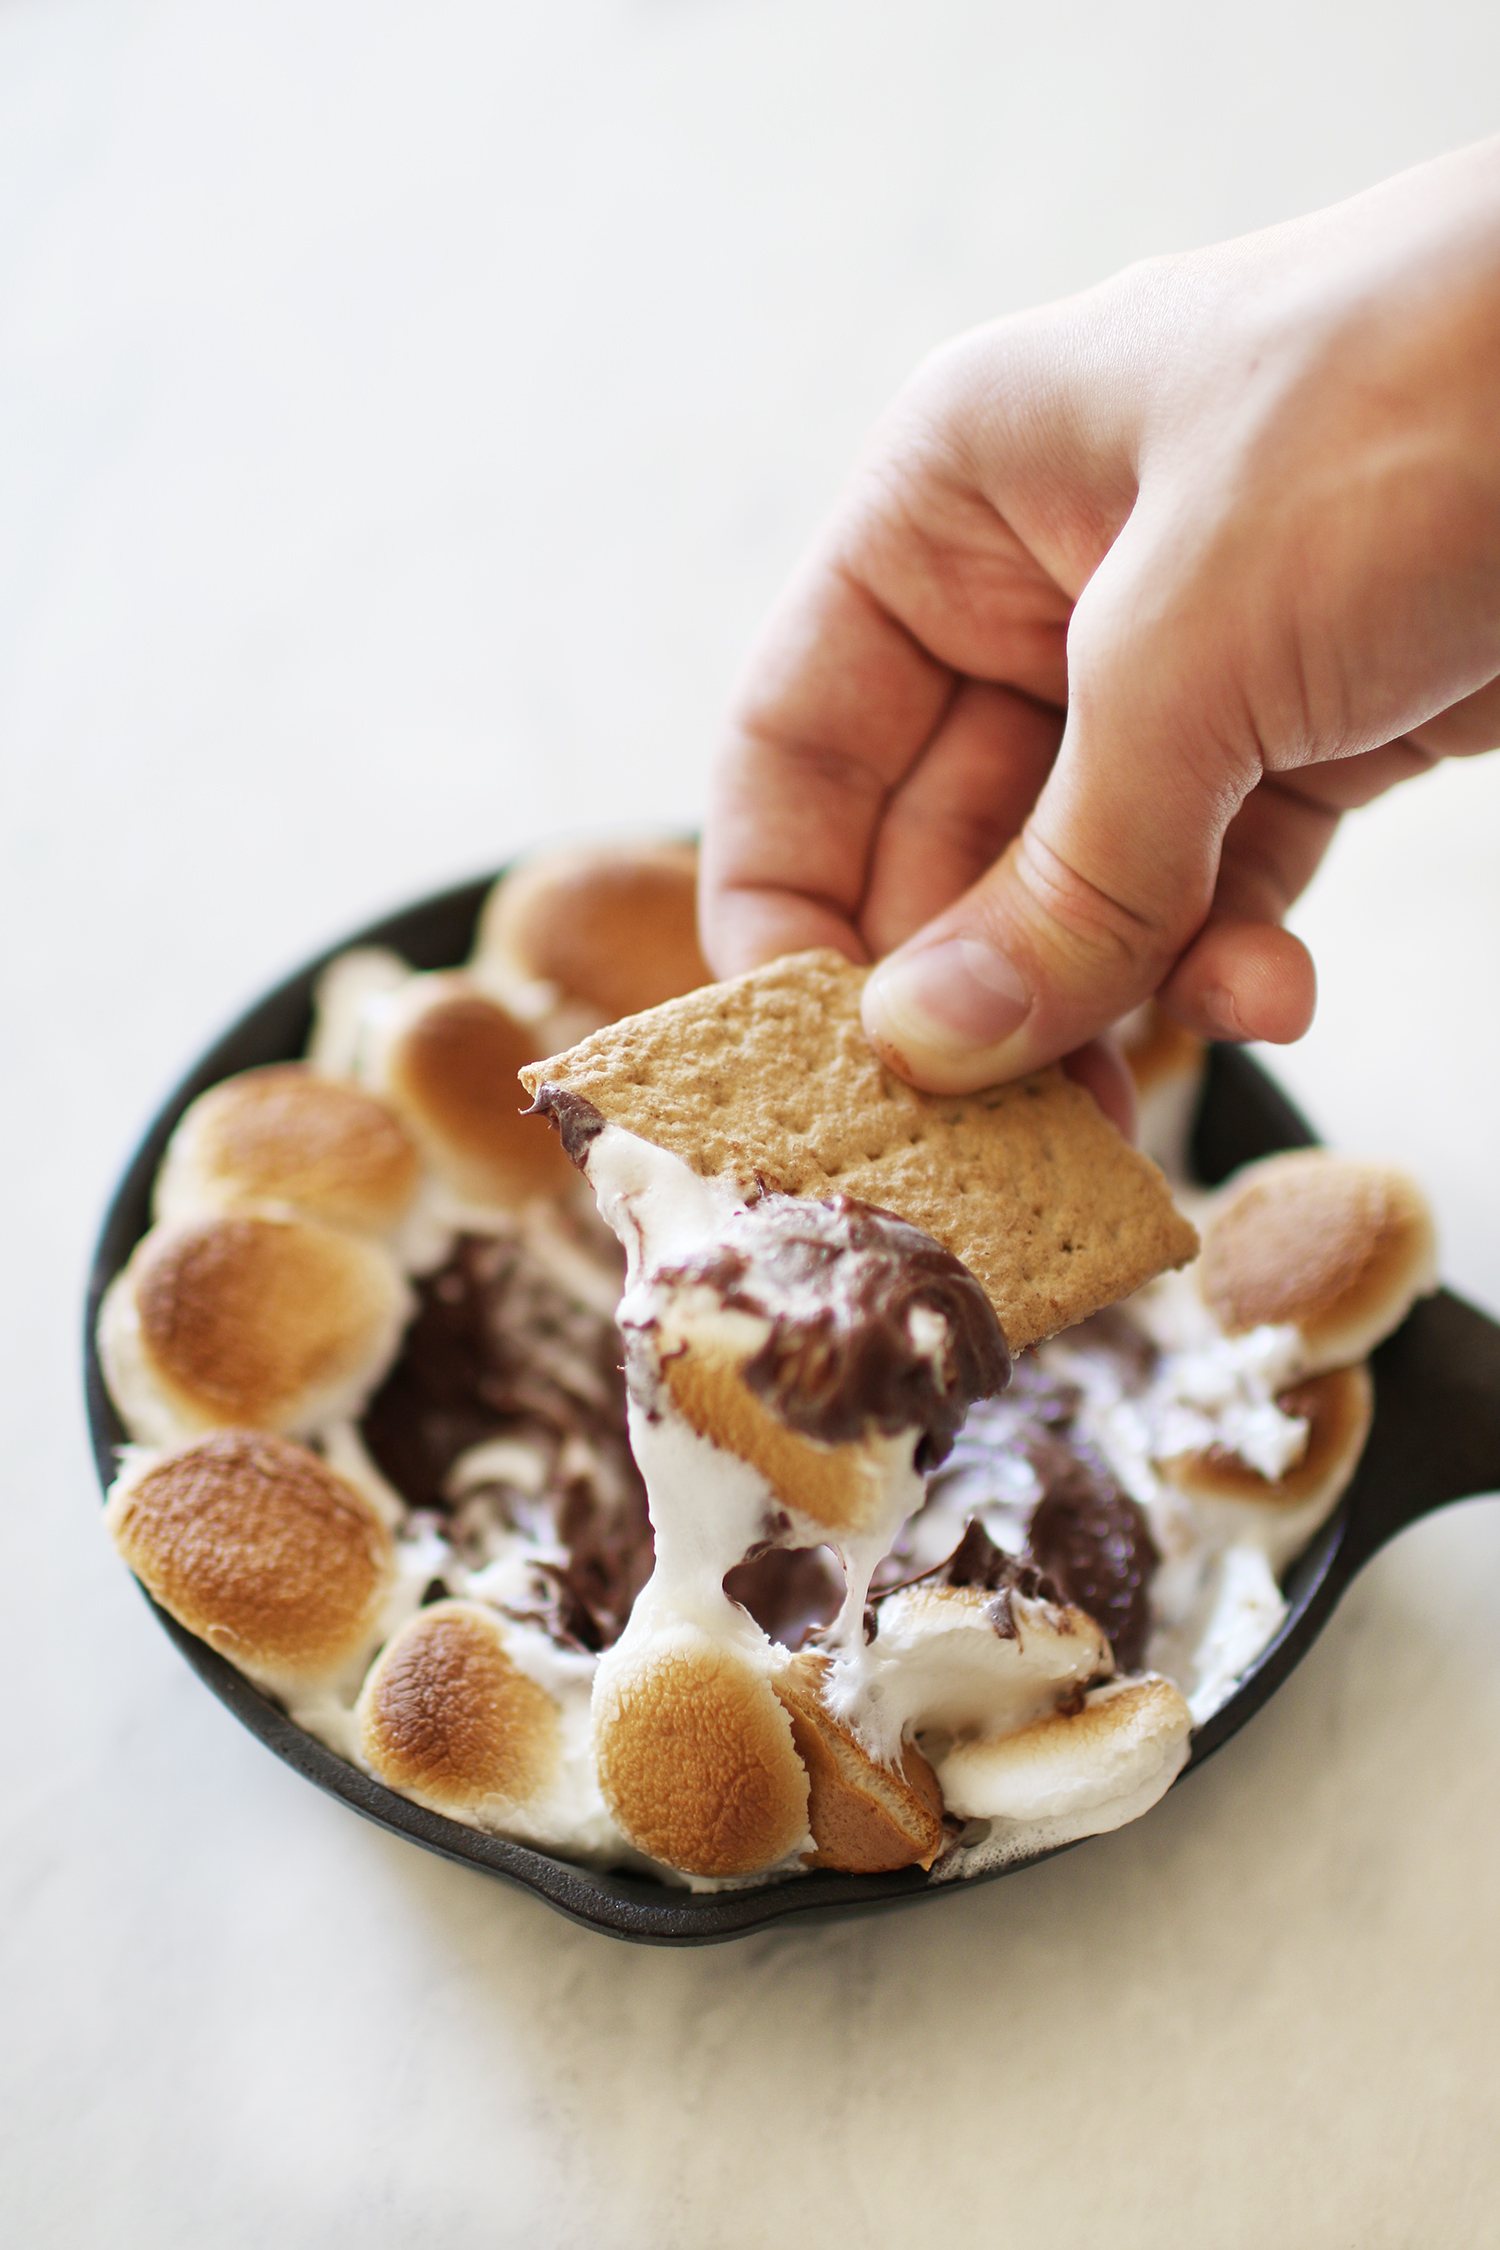 Quick and easy s'mores dip recipe on KaraLayne.com! The perfect dessert option for those cozy nights at home with the family! #DessertIdeas #EasyDessertIdeas #SmoresRecipe #SmoresDipRecipe